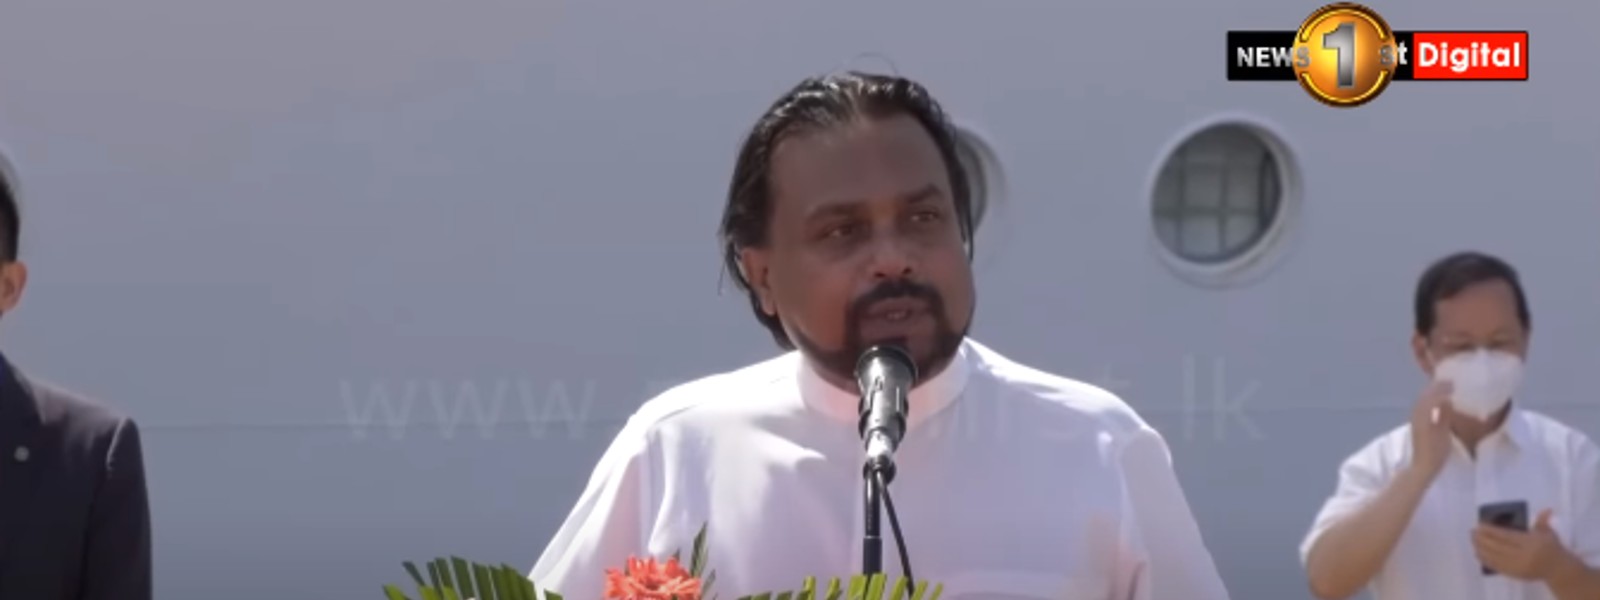 The land may divide us, but the sky and the ocean unites us all: Wimal at the welcome ceremony for Yuan Wang 5